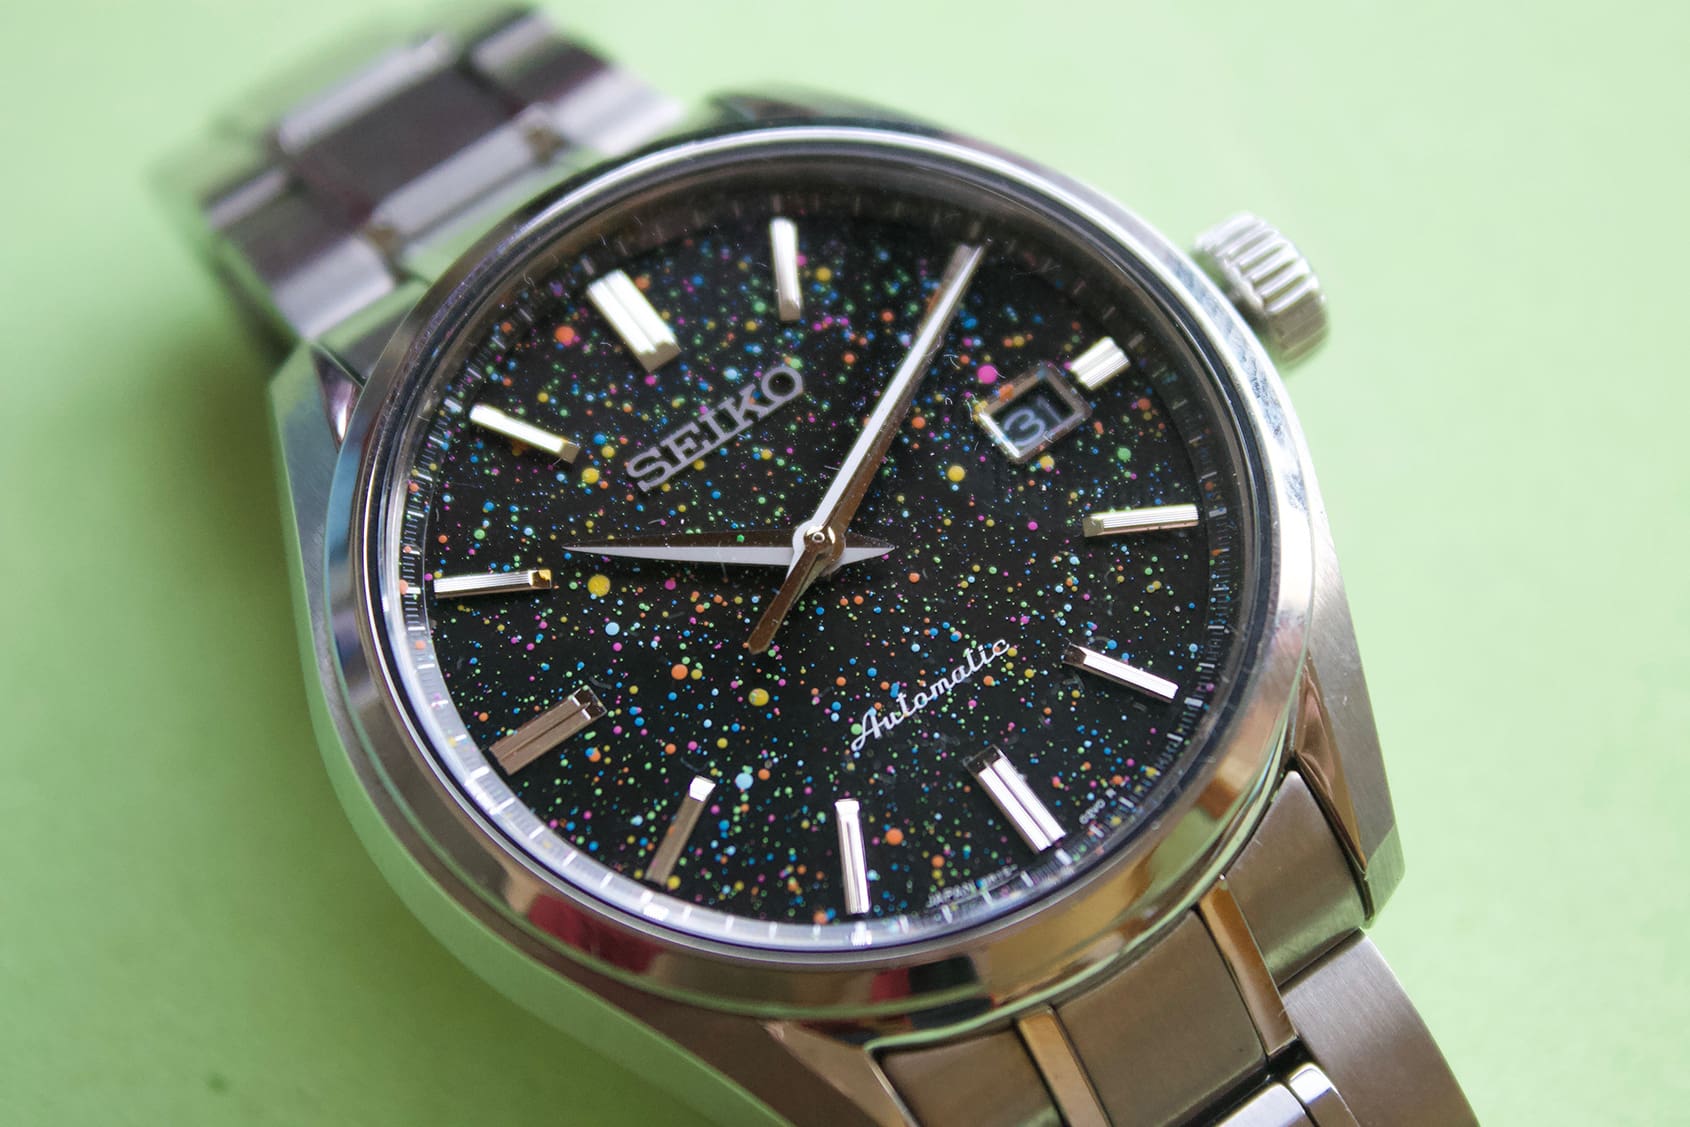 WHO TO FOLLOW: @Creodesignwatches – the dial artist